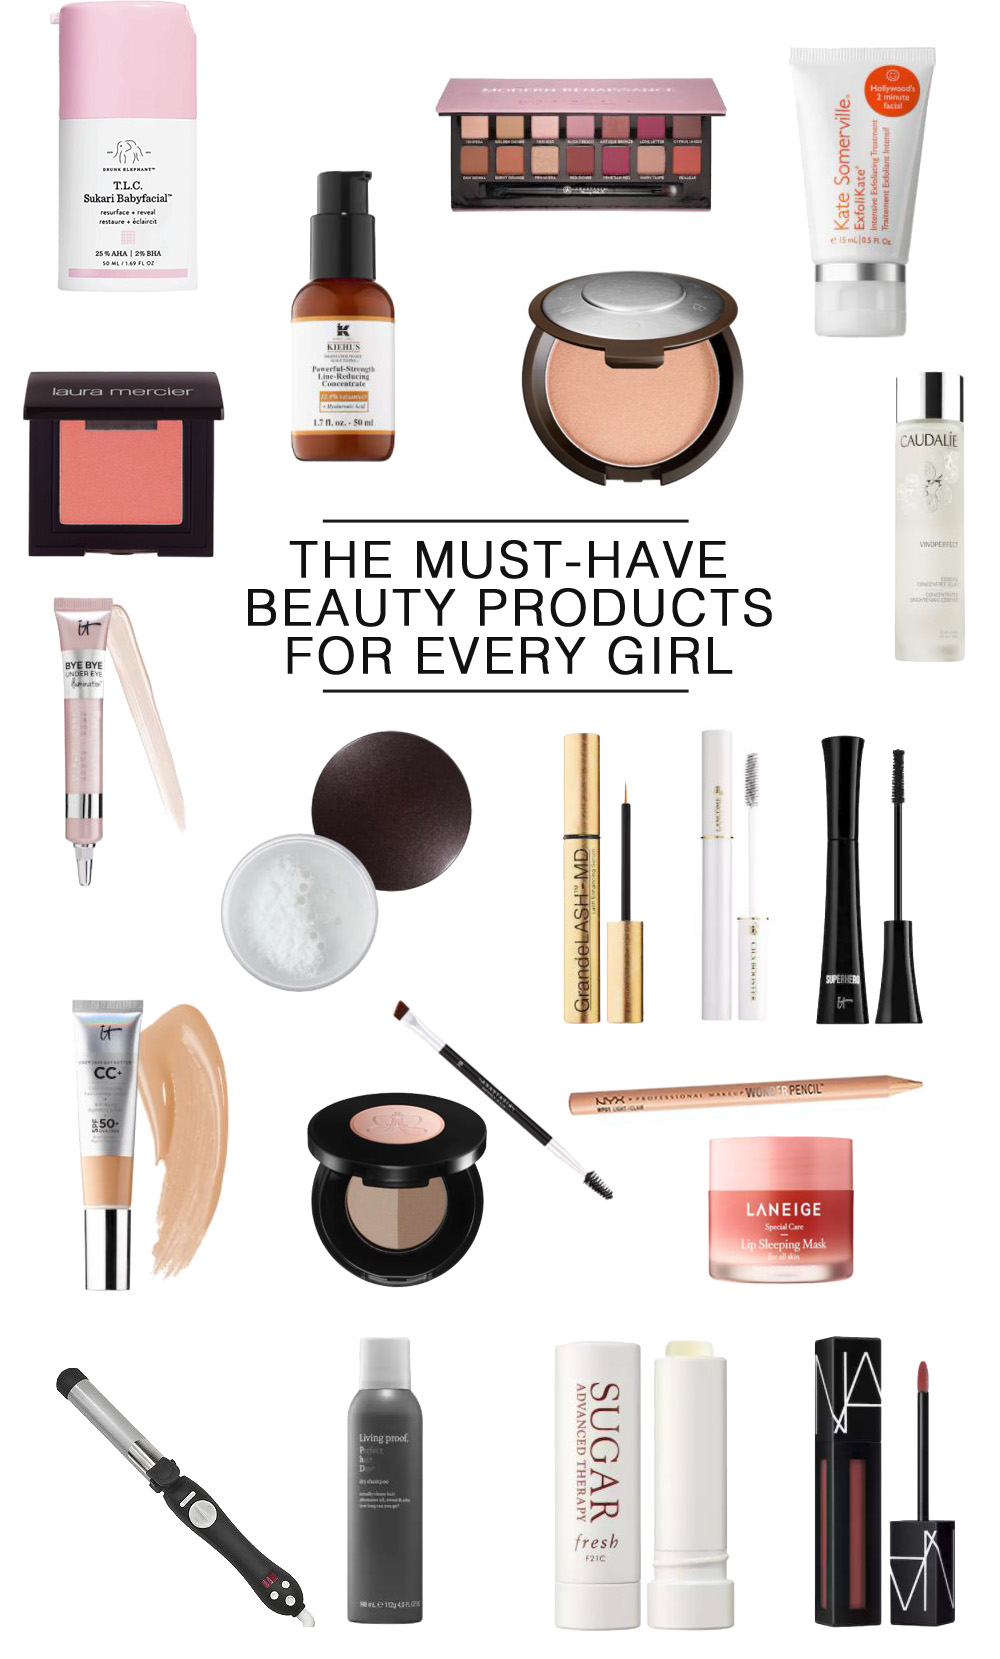 The Ultimate Beauty Products List for the Every Girl by popular Florida style blogger, The Modern Savvy